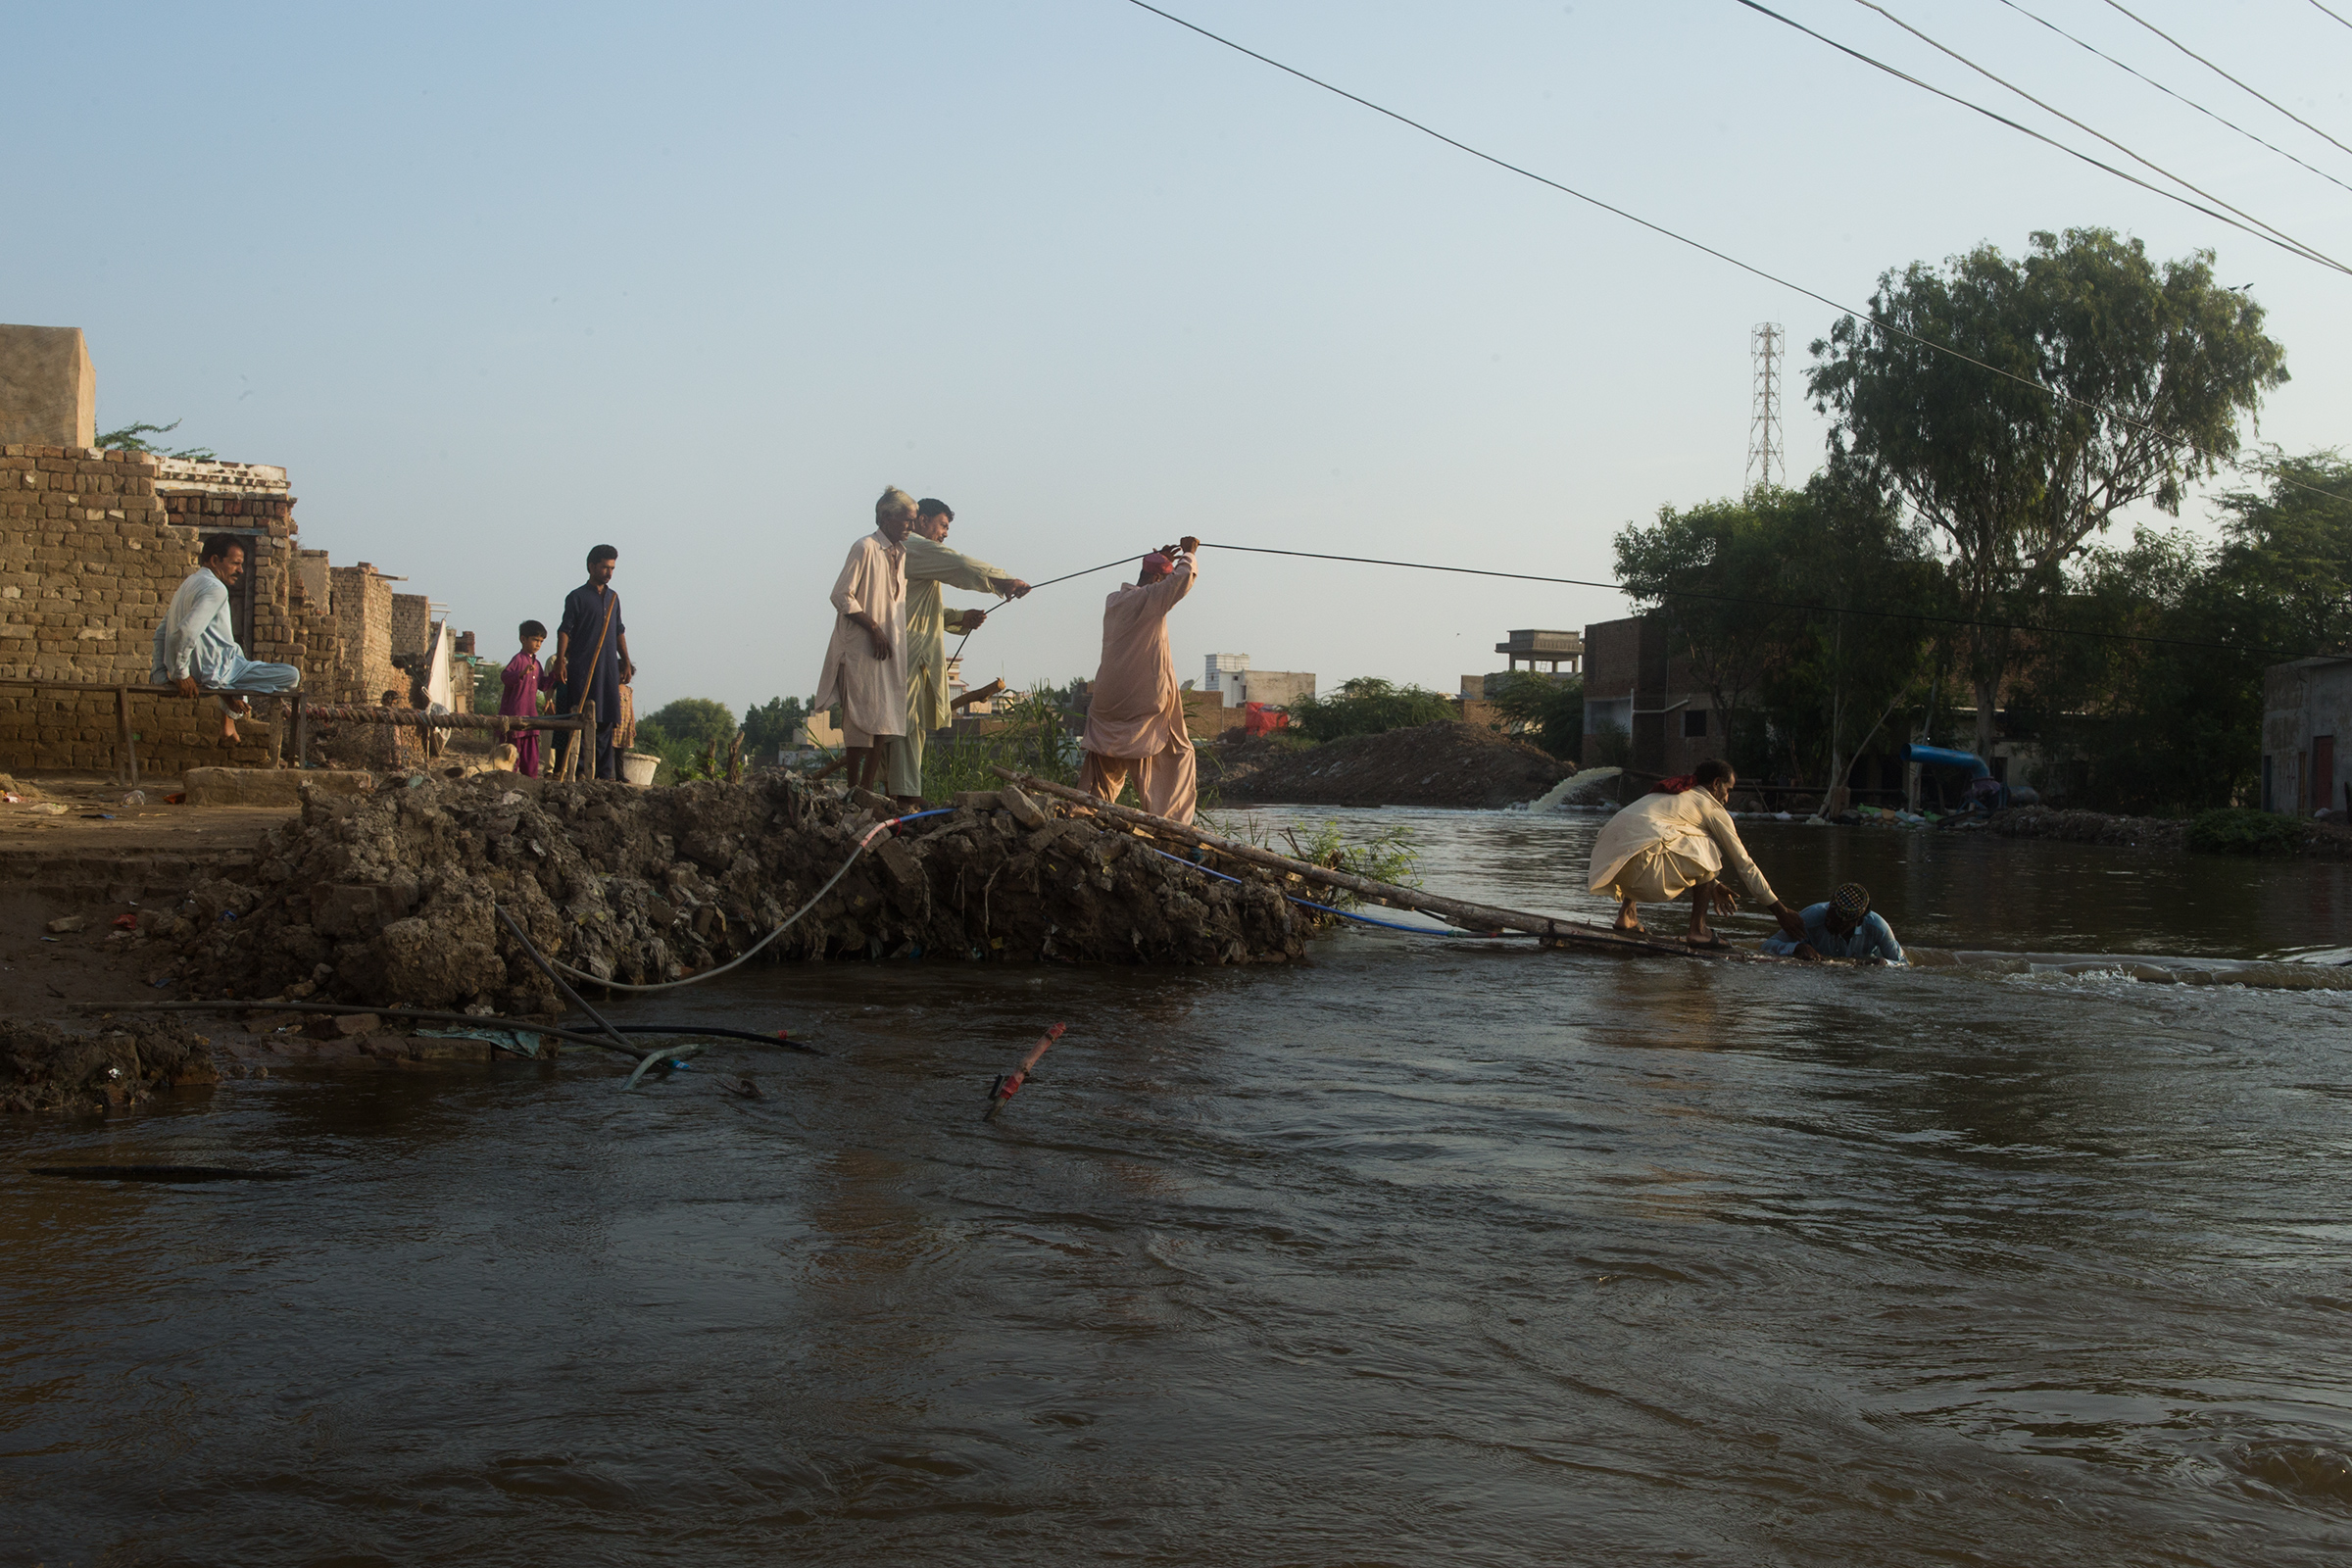 Residents rush to rescue a man from drowning on an embankment between Hayat Khaskheli village and the city of Jhuddo, Sept. 9. (Hassaan Gondal for TIME)